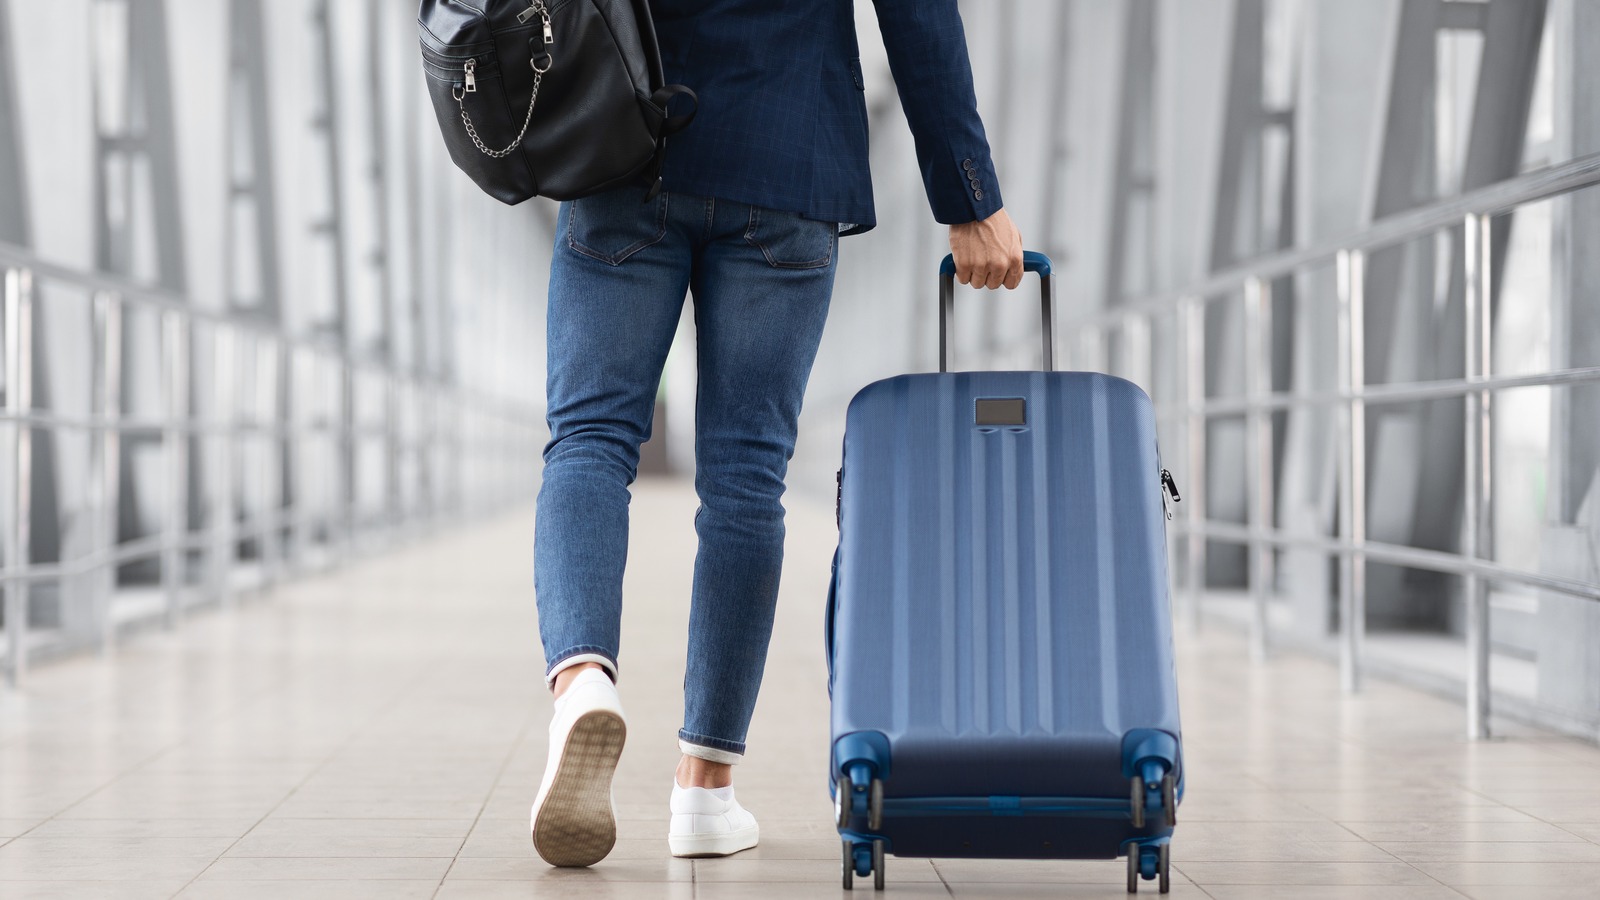 What To Know Before Gate Checking Your Bag – Explore